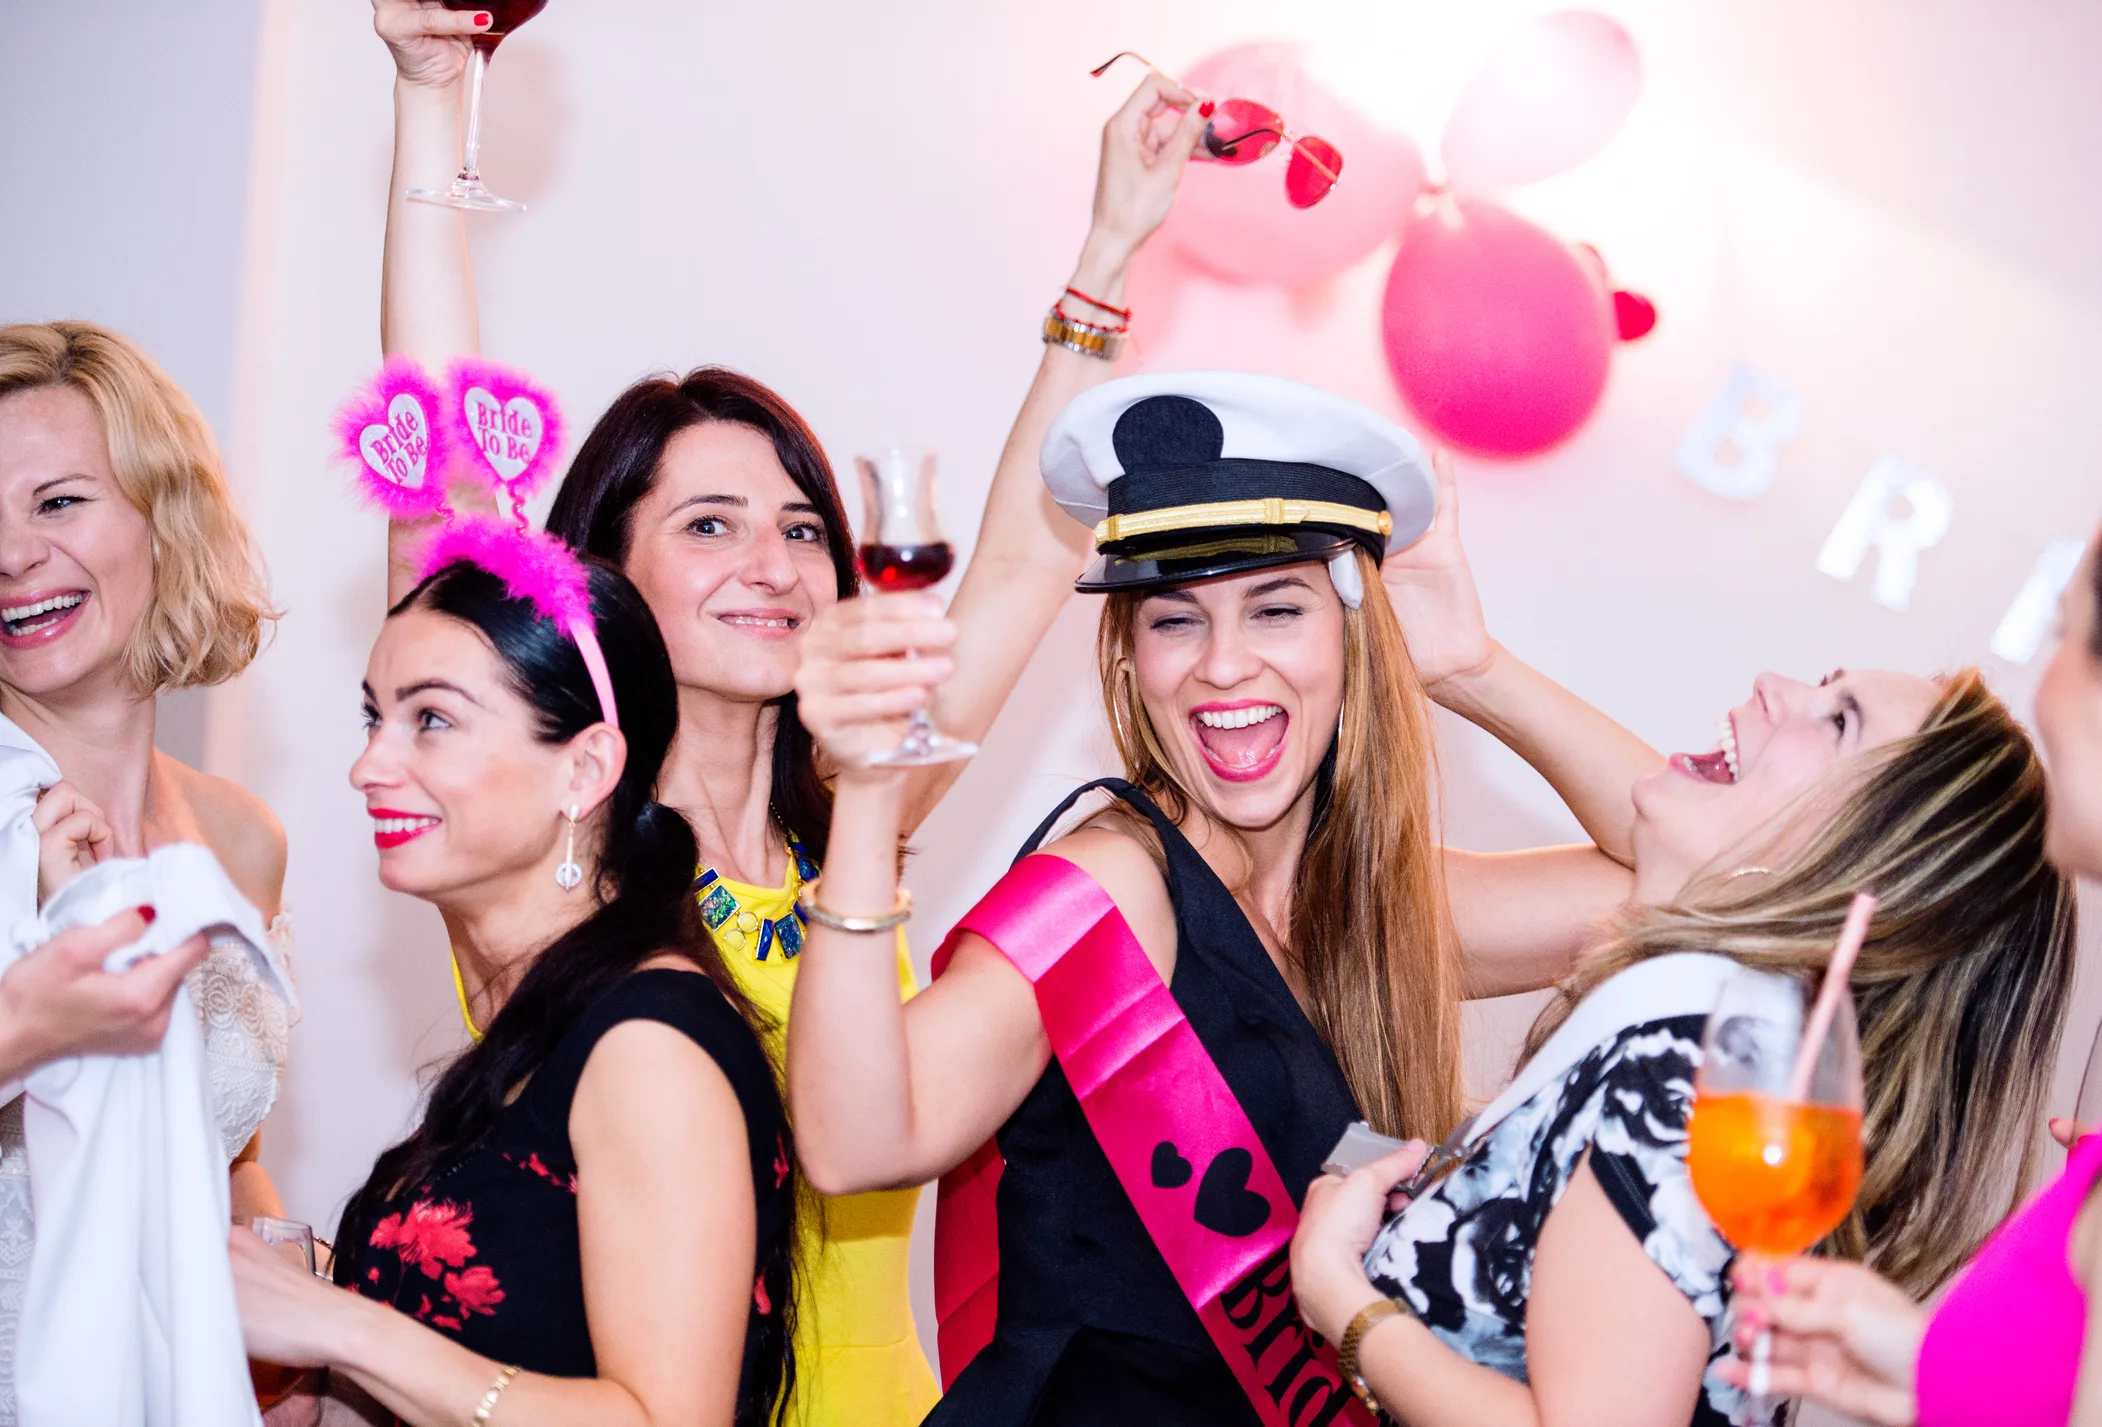 Cheerful bride and happy bridesmaids celebrating hen party with drinks. Women enjoying a bachelorette party dancing.